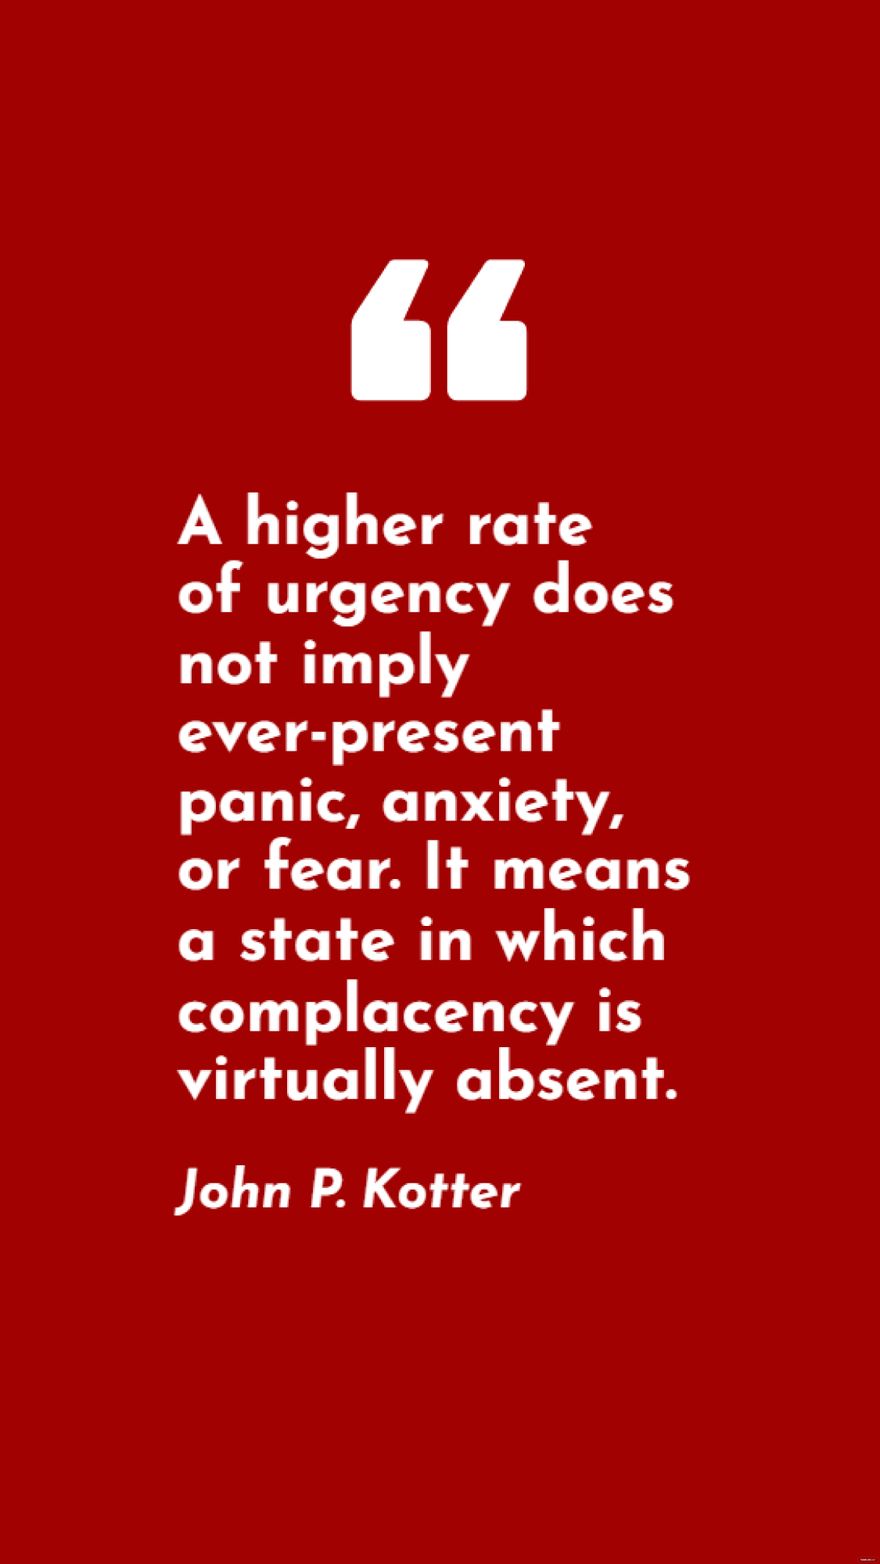 Free John P. Kotter - A higher rate of urgency does not imply ever-present panic, anxiety, or fear. It means a state in which complacency is virtually absent. in JPG